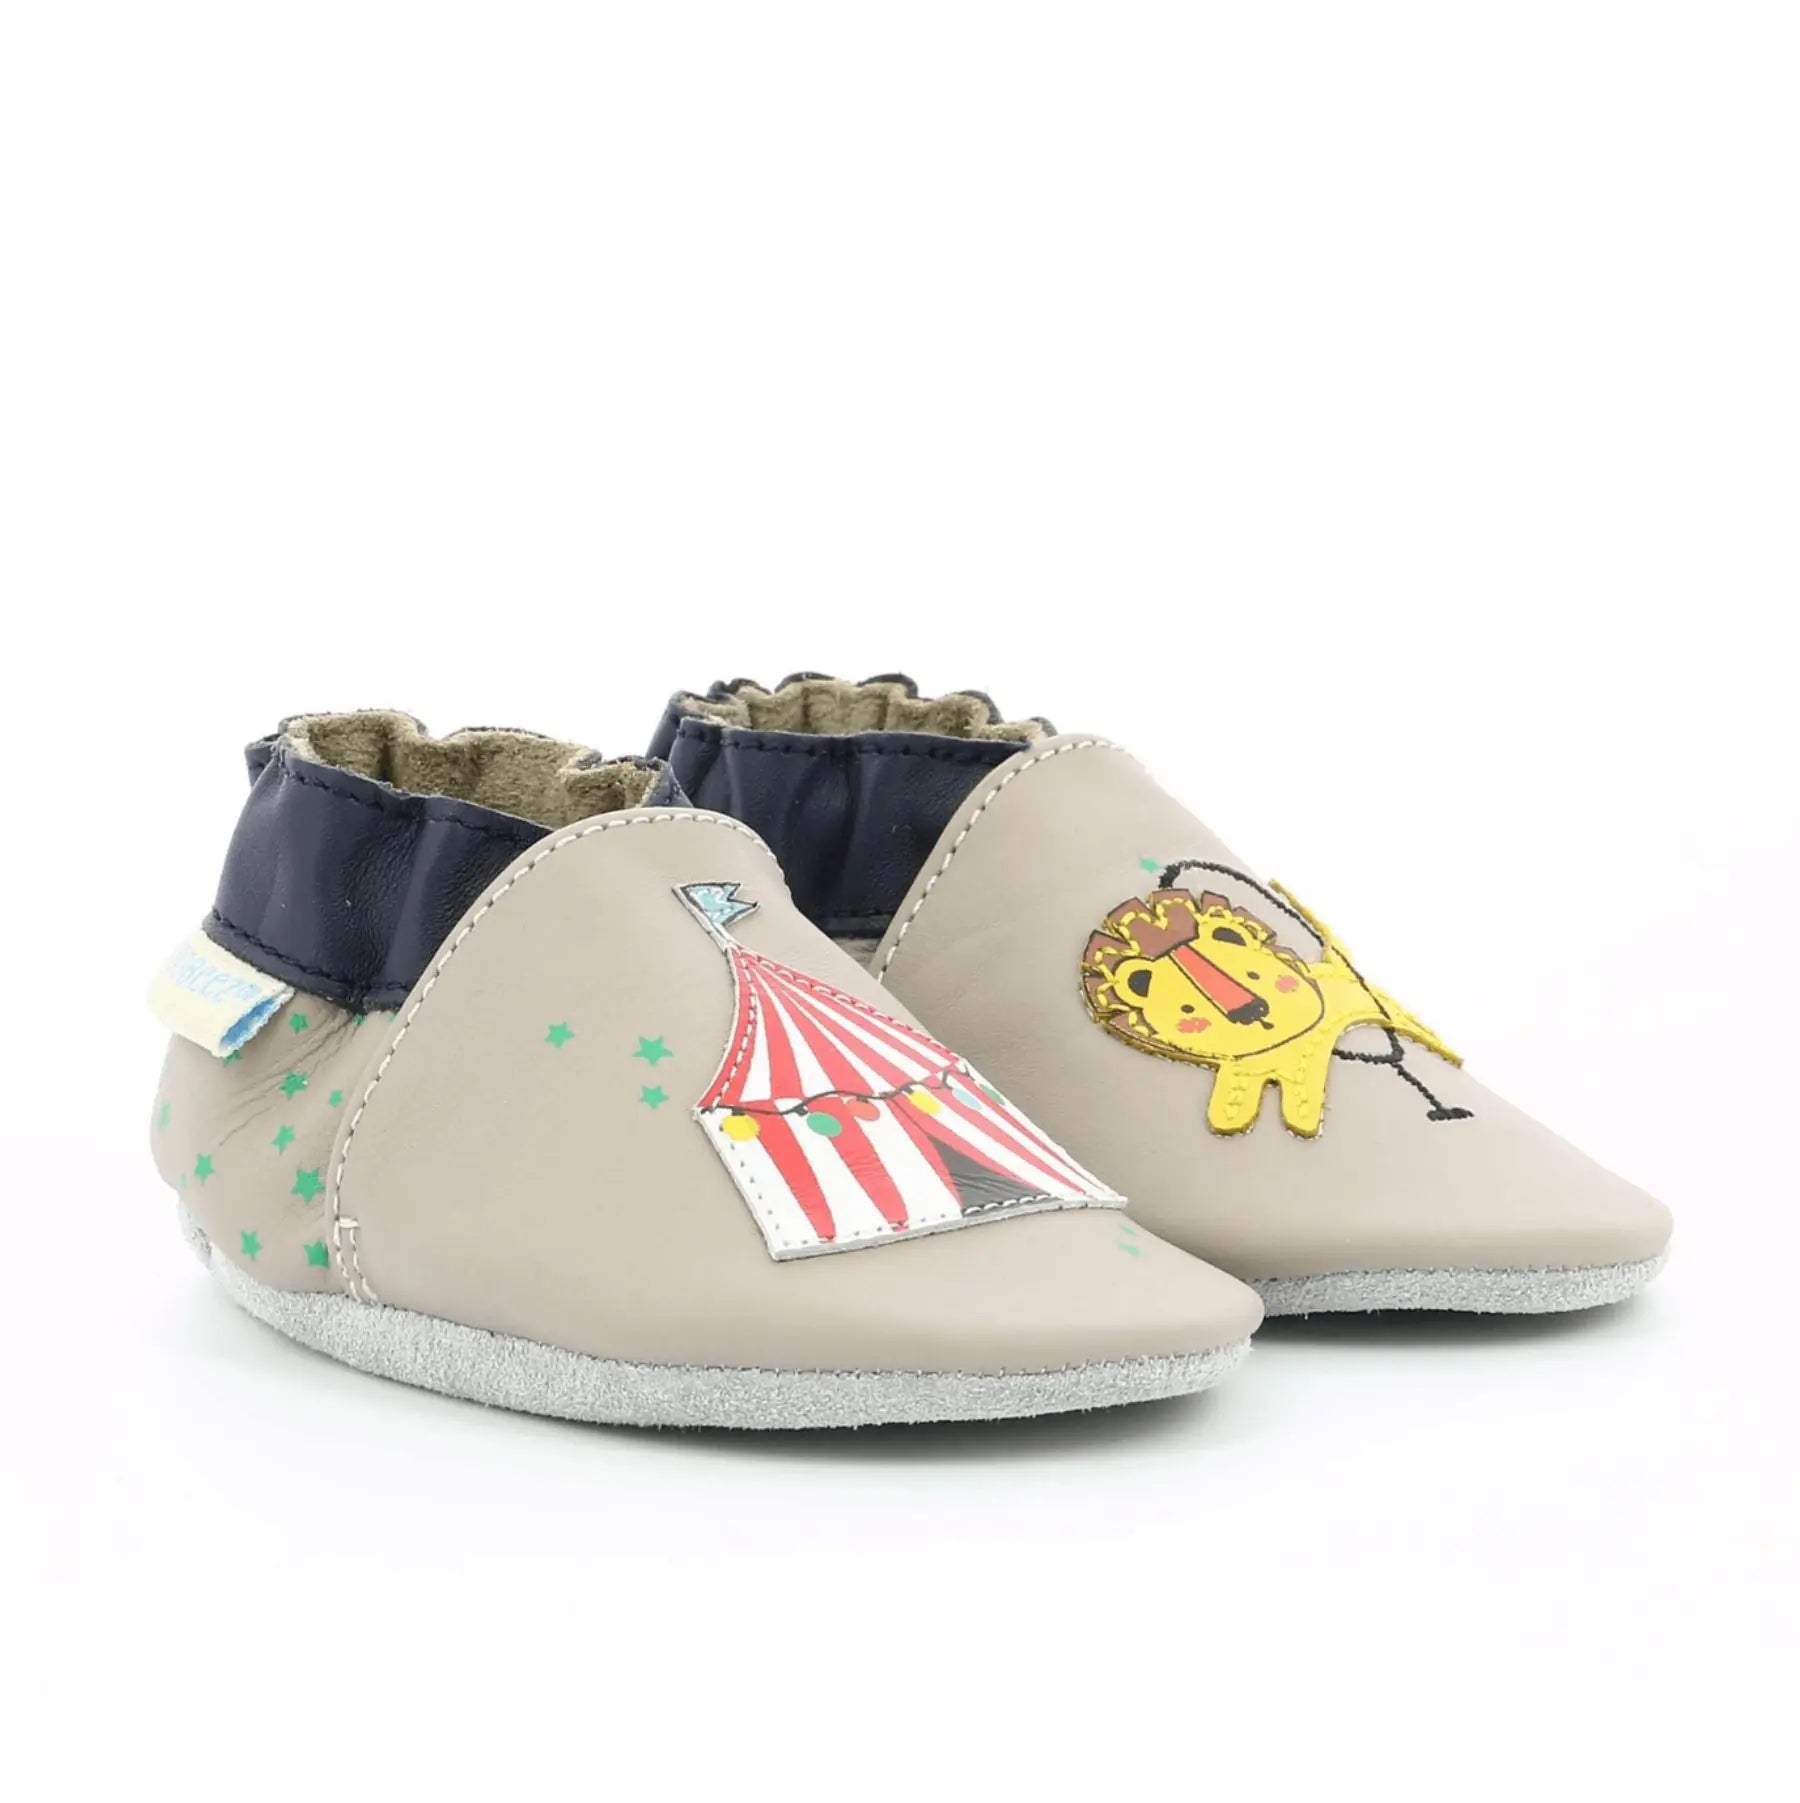 ROBEEZ Chaussons Lion Circus Gris Taupe ma petite pointure